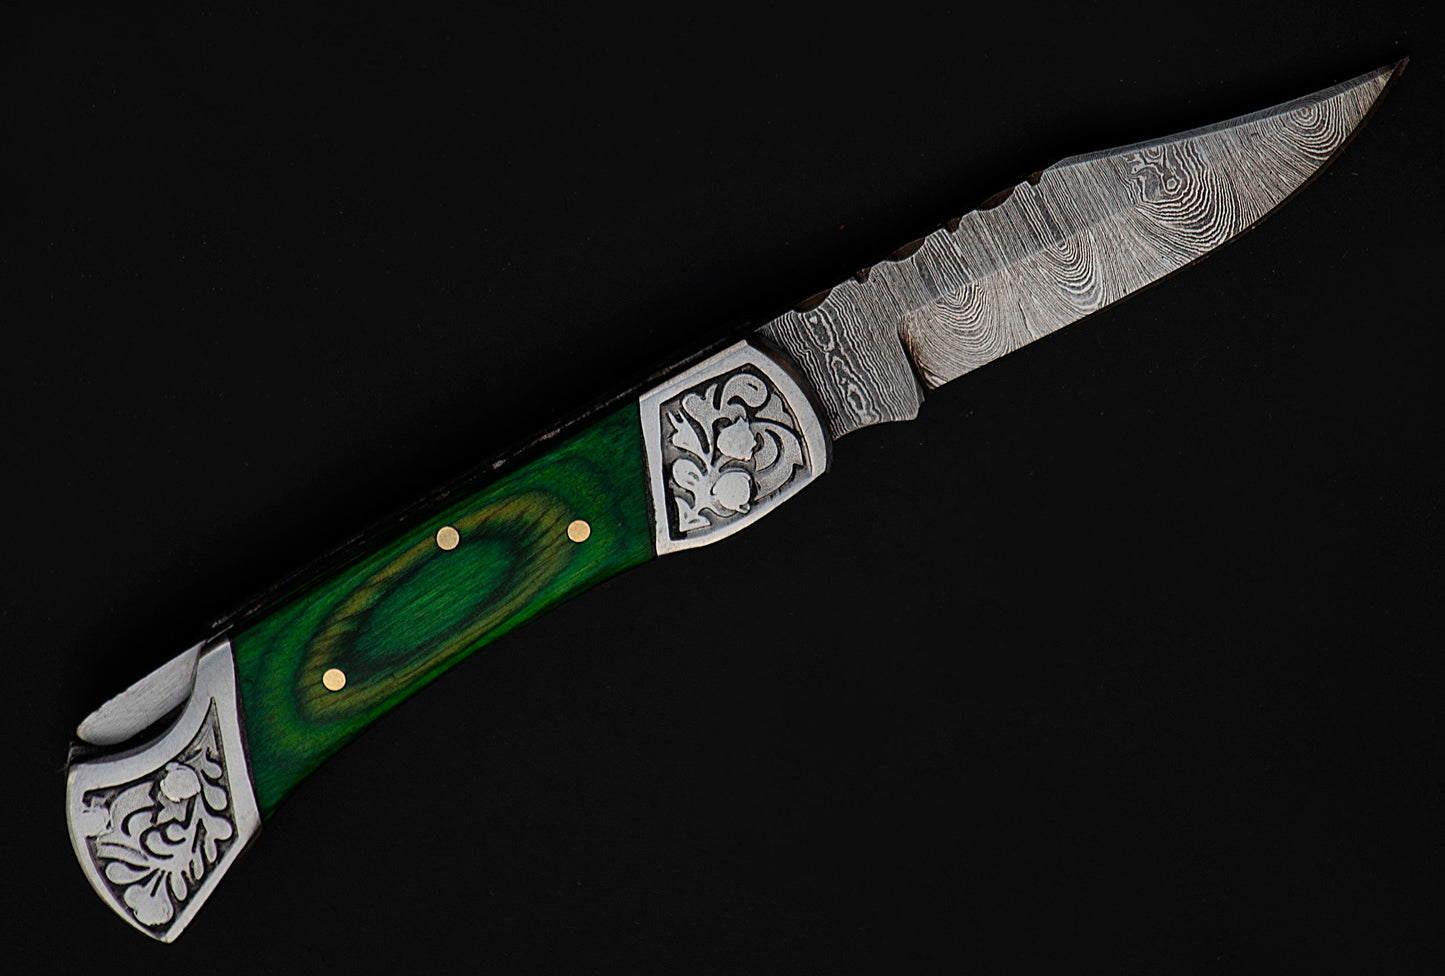 7" long back lock Folding Knife, Green colored wood Scale with Engraved steel bolster, custom made 3.25" Hand Forged Damascus steel blade, Cow hide leather sheath with belt loop